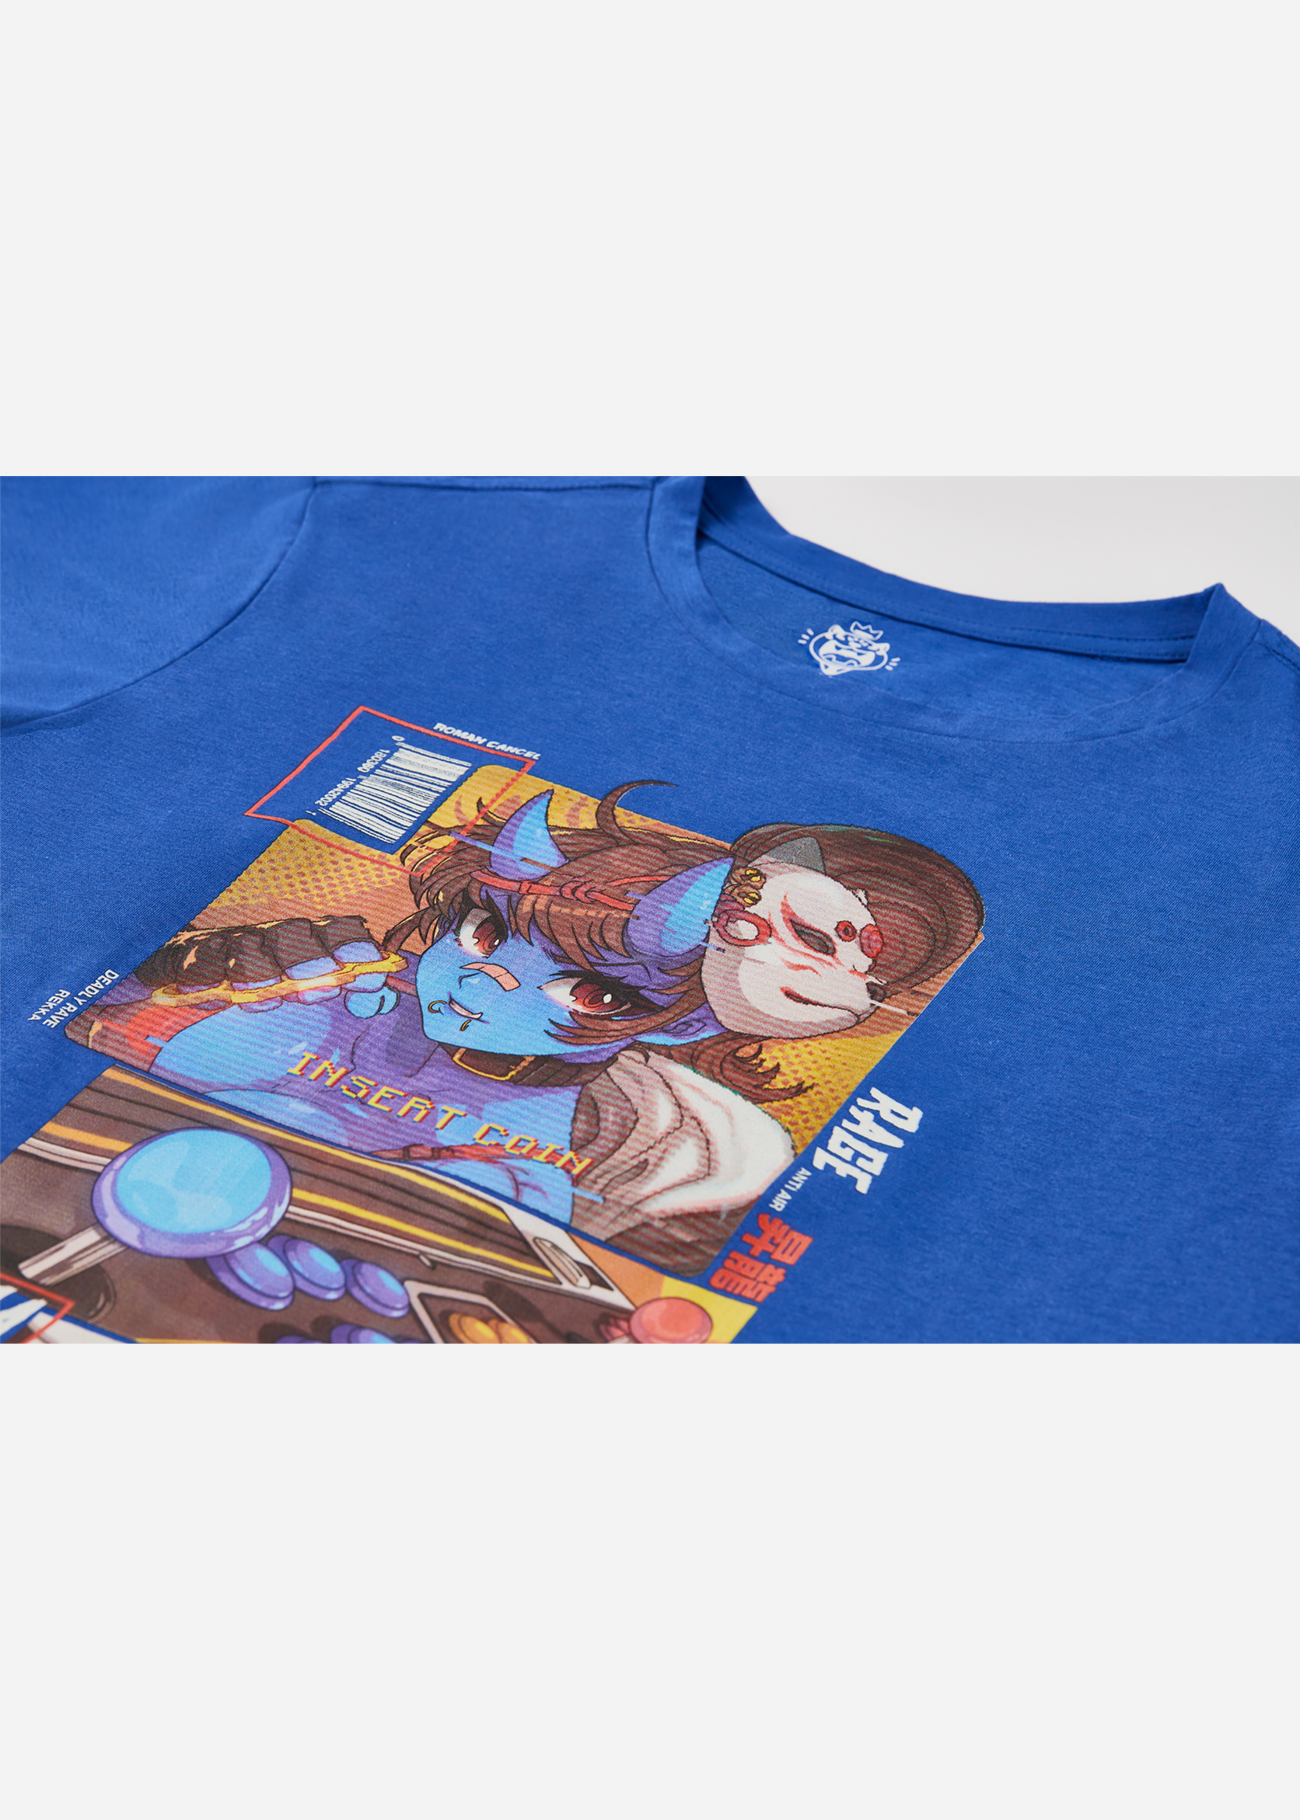 A front facing photo from the FGC, a fighting game community inspired shirt, anime waifu on the front in print on this graphic shirt